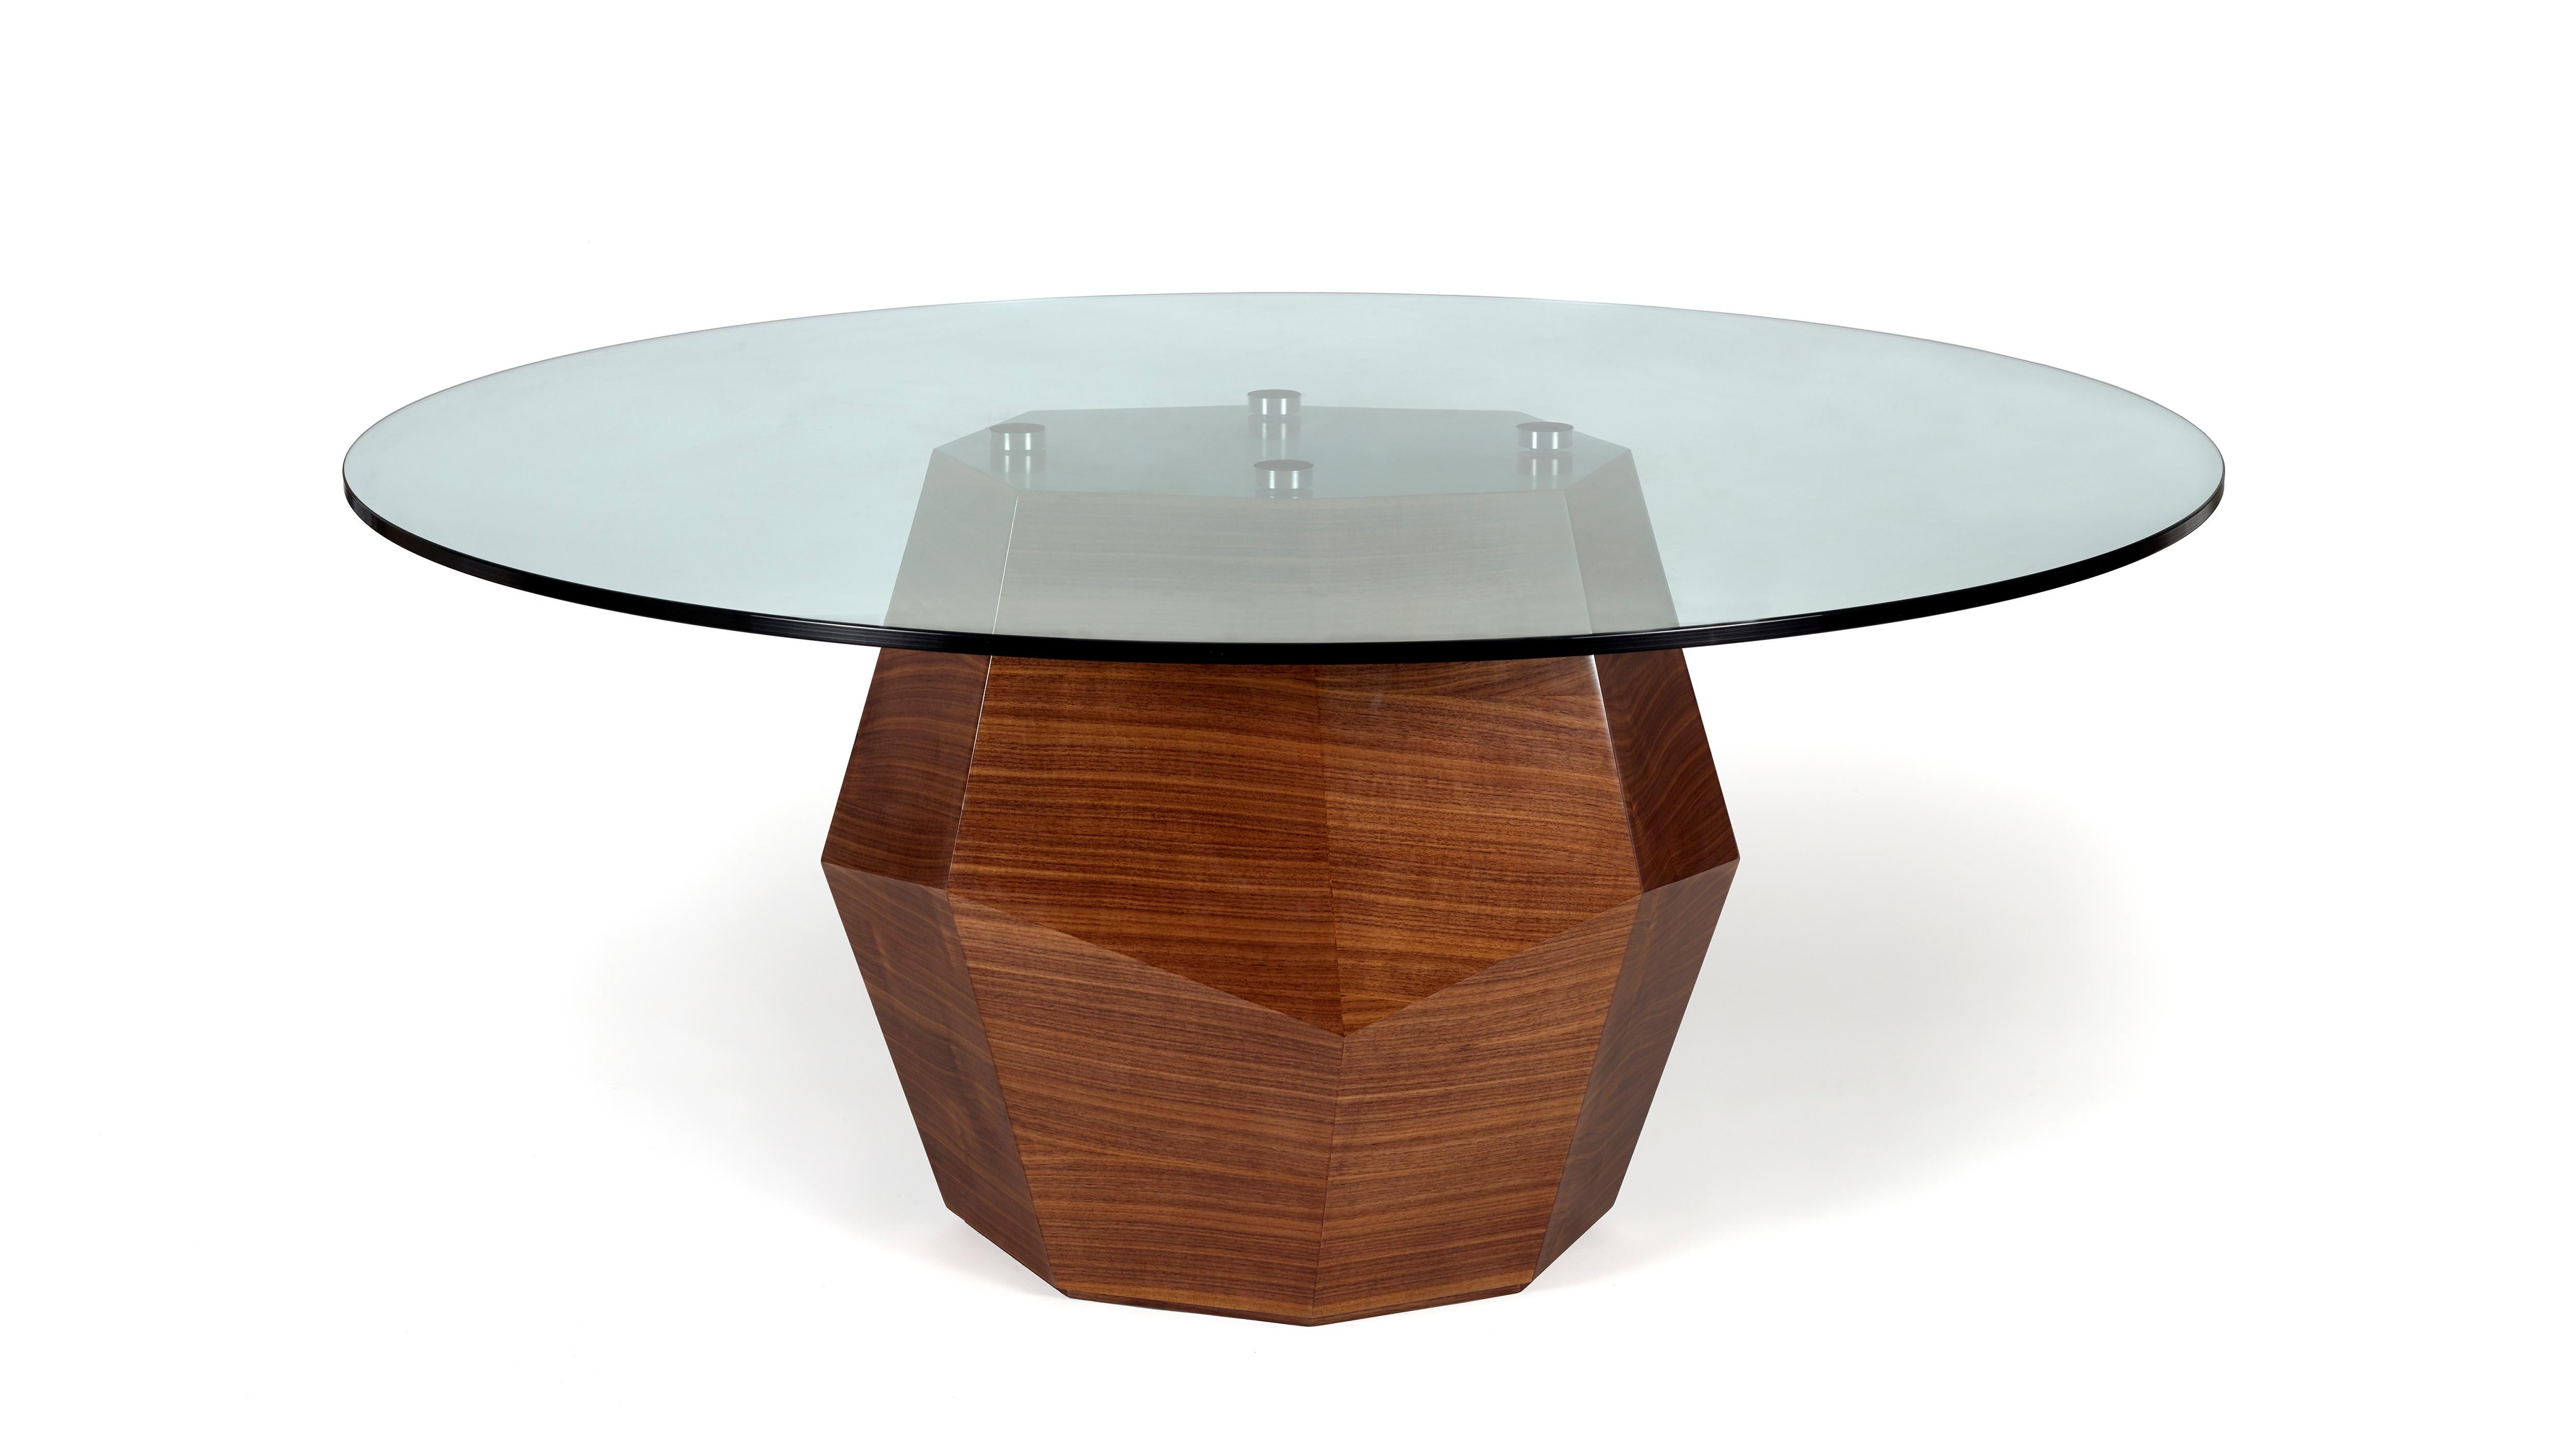 Rock Walnut Dining Table by InsidherLand
Dimensions: D 160 x W 160 x H 74 cm.
Materials: Glass, walnut veneer.
130 kg.

The robust volume of Rock dining table entirely finished in walnut veneer on an elegant faceted work that resembles the irregular